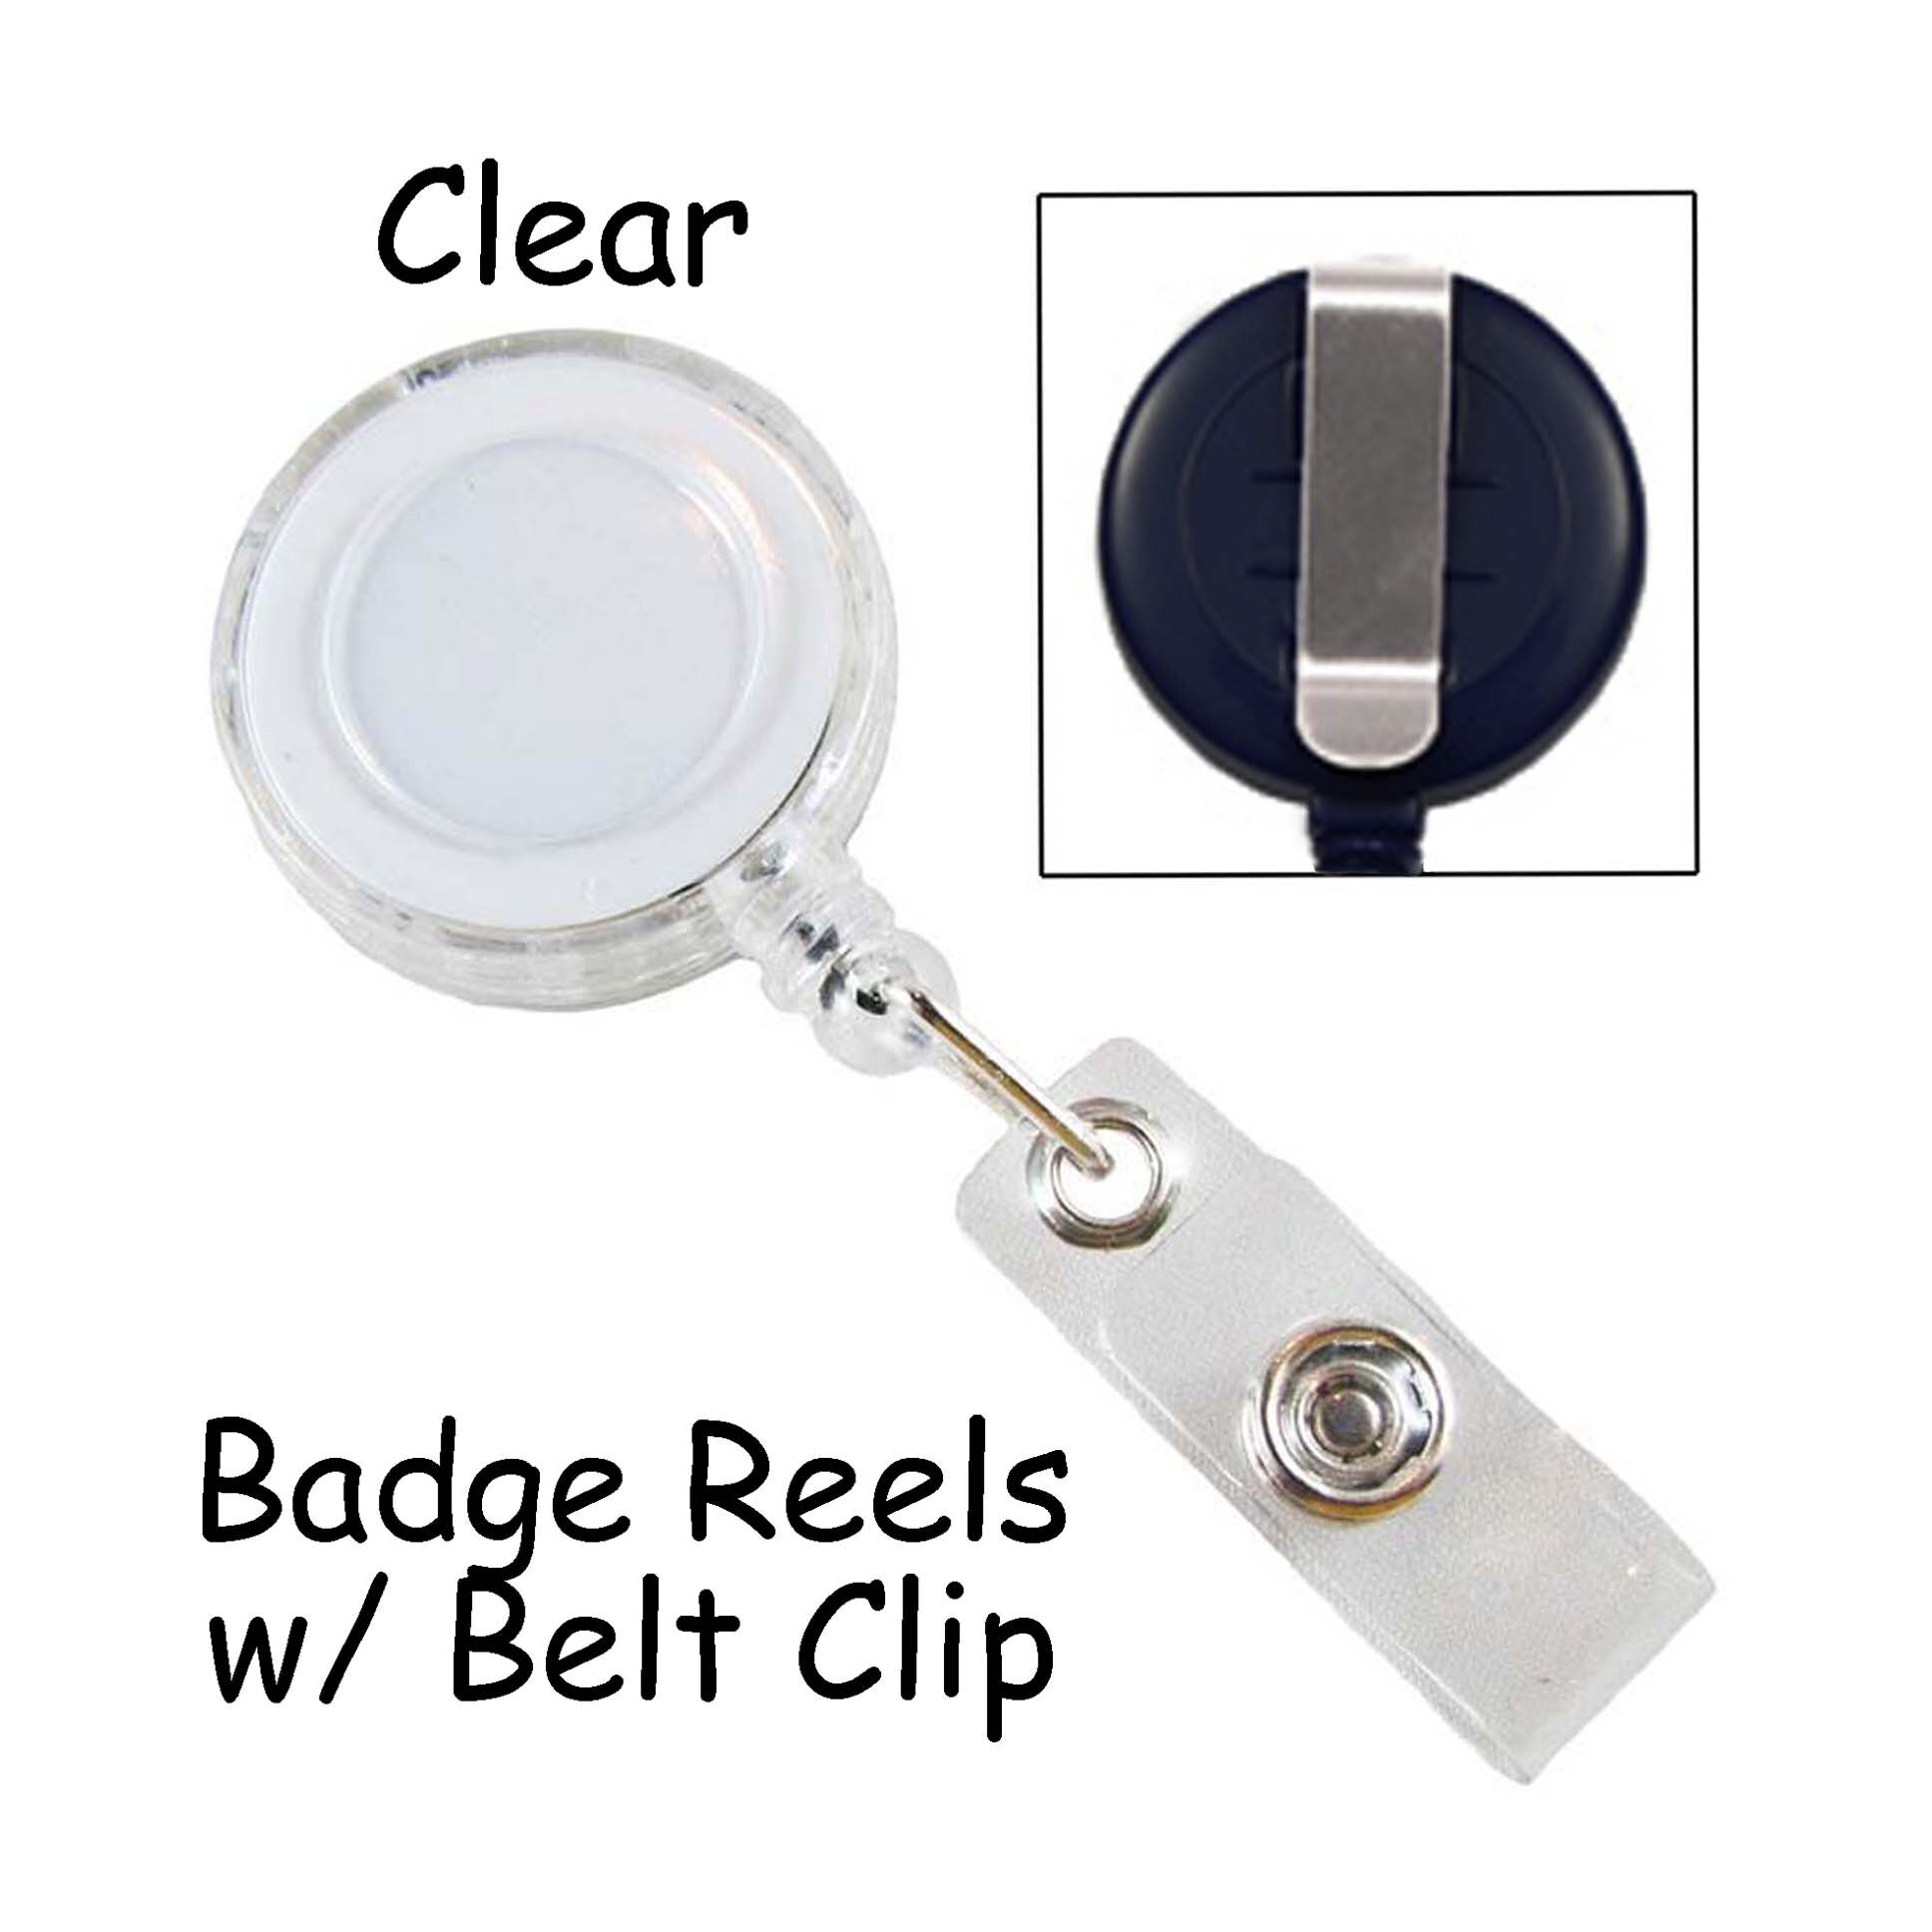 1 Badge Reel Clear Retractable With Vinyl Strap and Slide Clip SEE